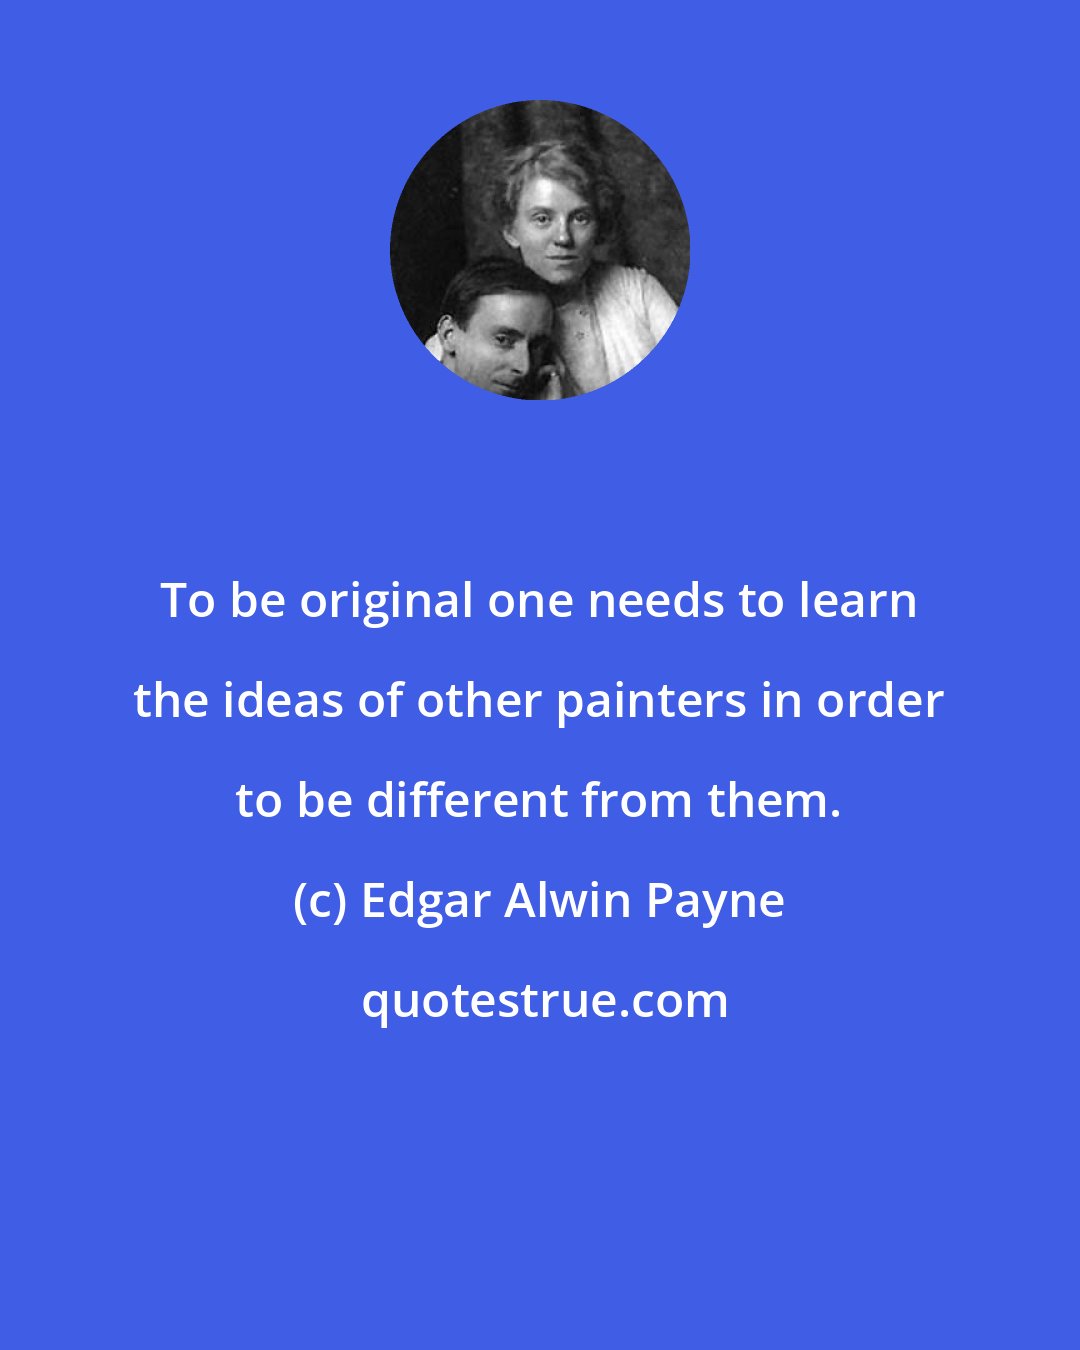 Edgar Alwin Payne: To be original one needs to learn the ideas of other painters in order to be different from them.